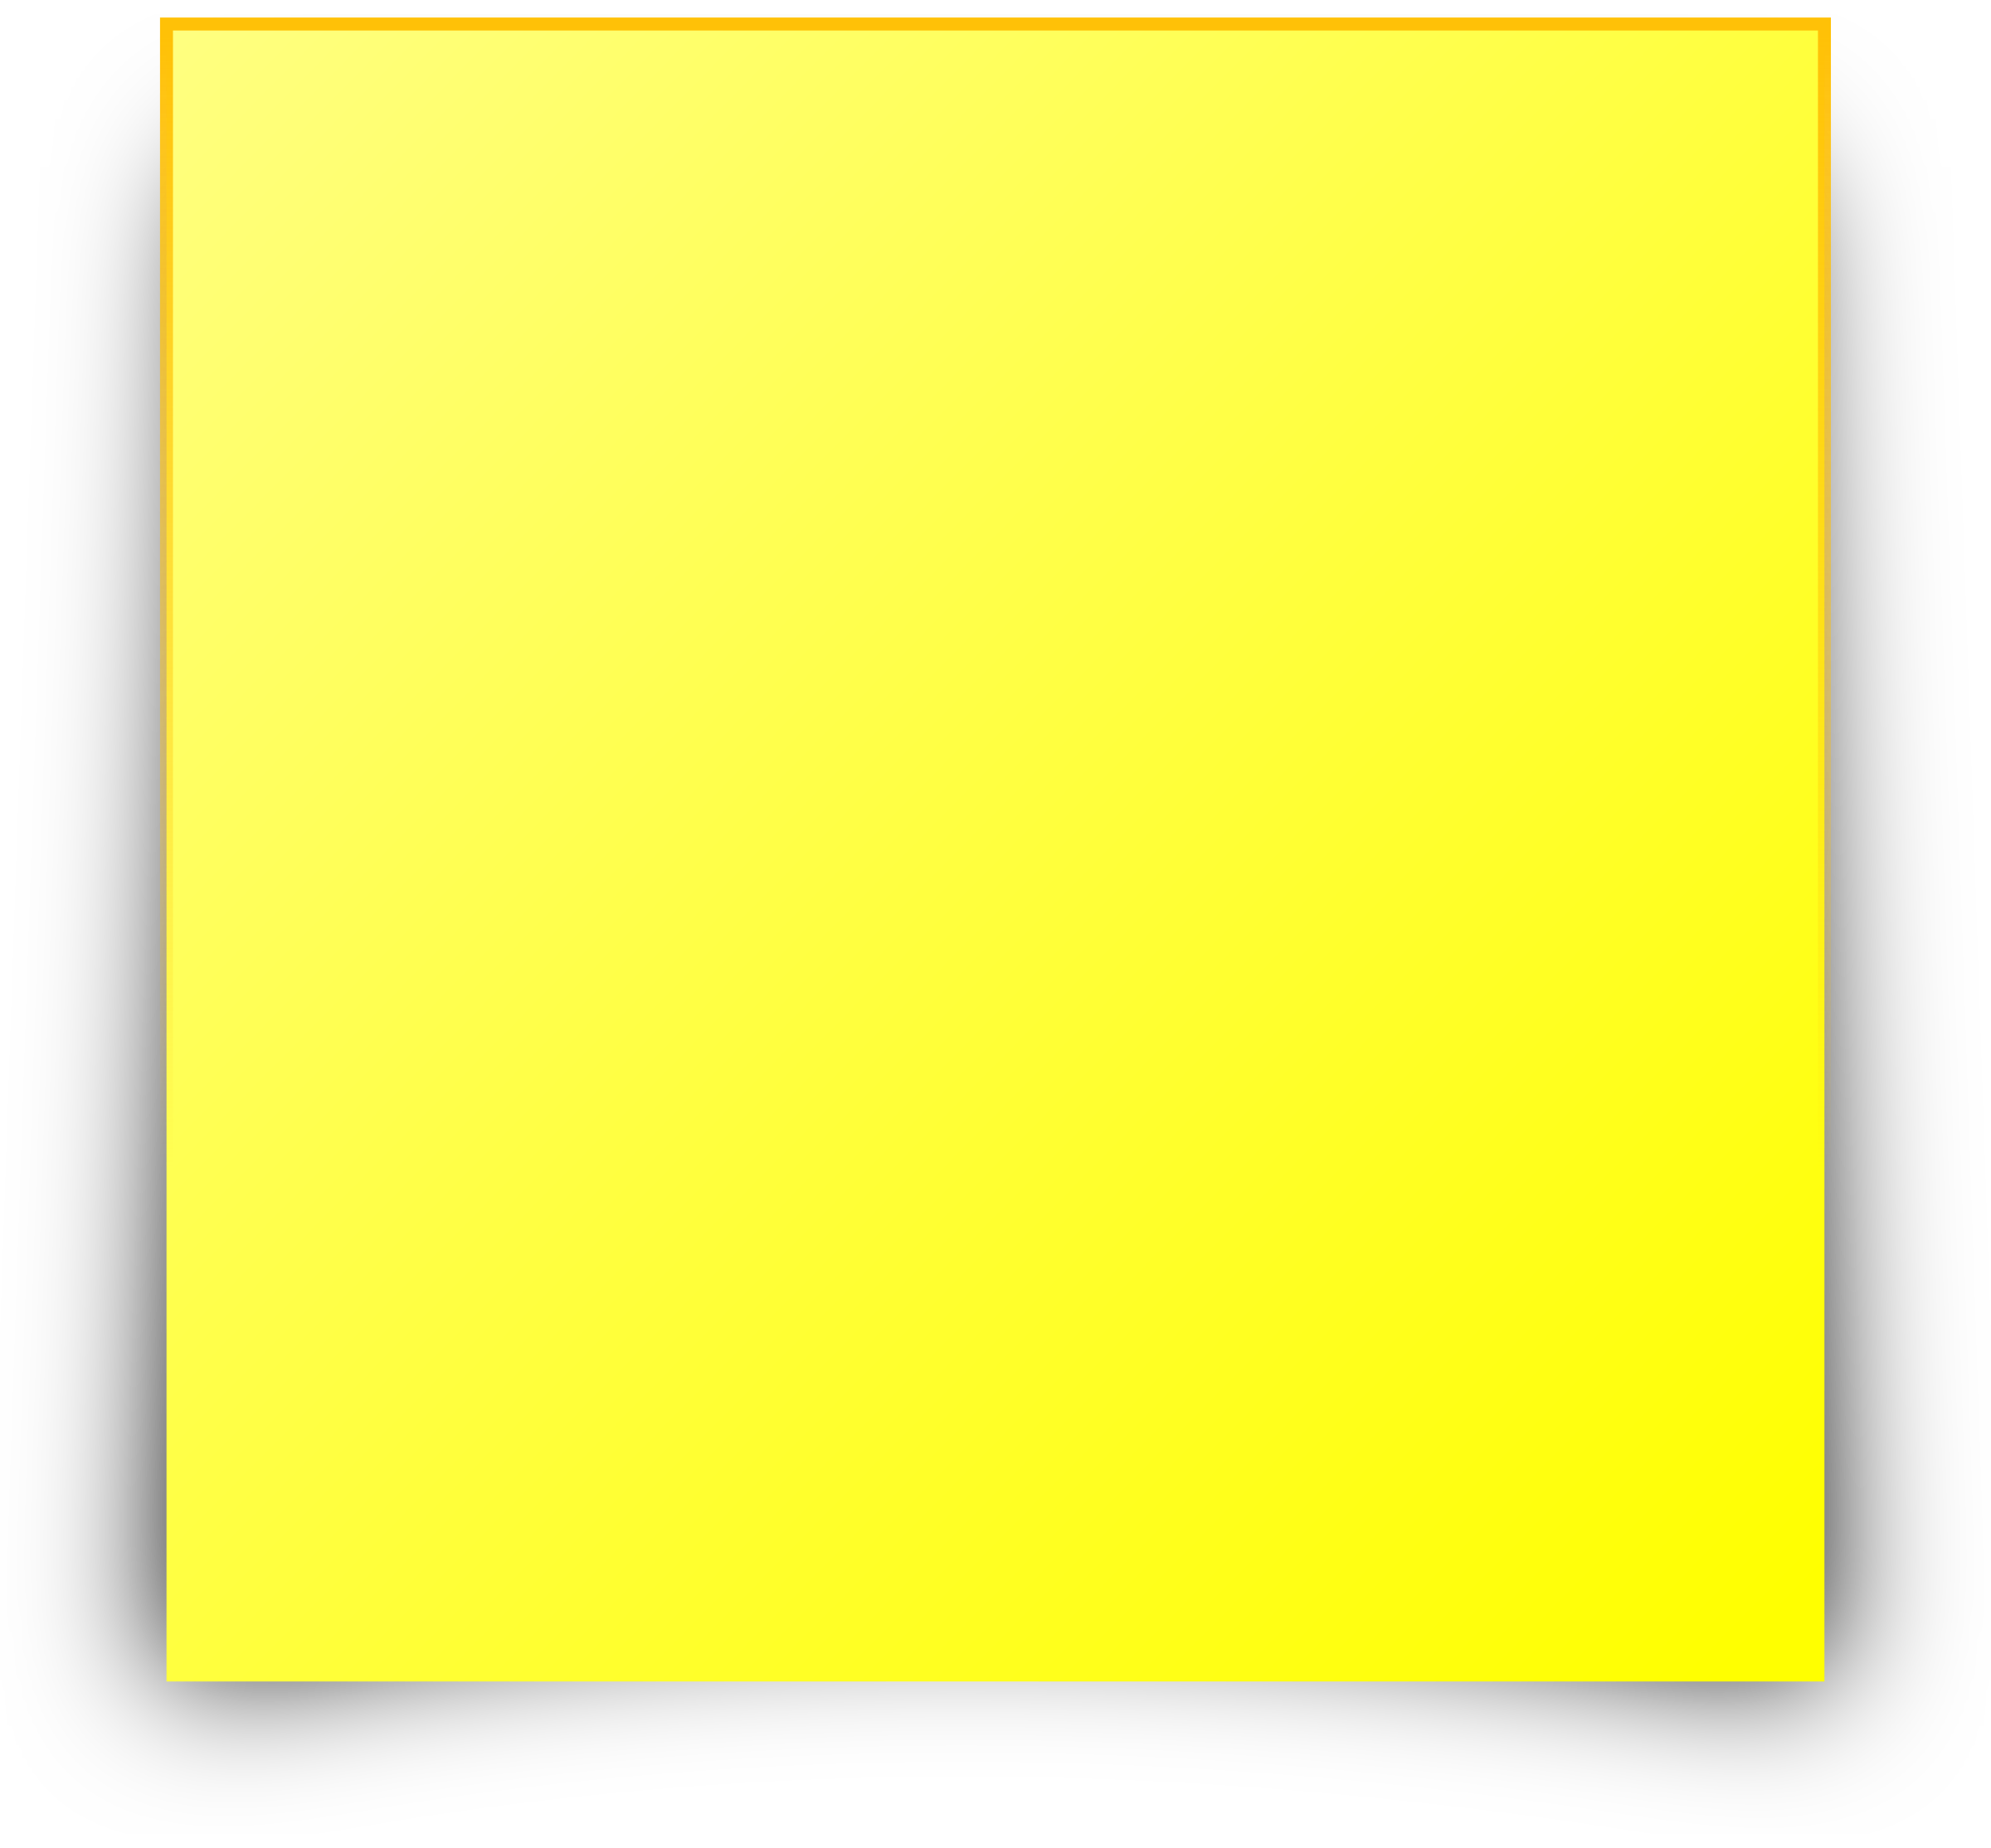 Yellow Sticky Notes PNG Image